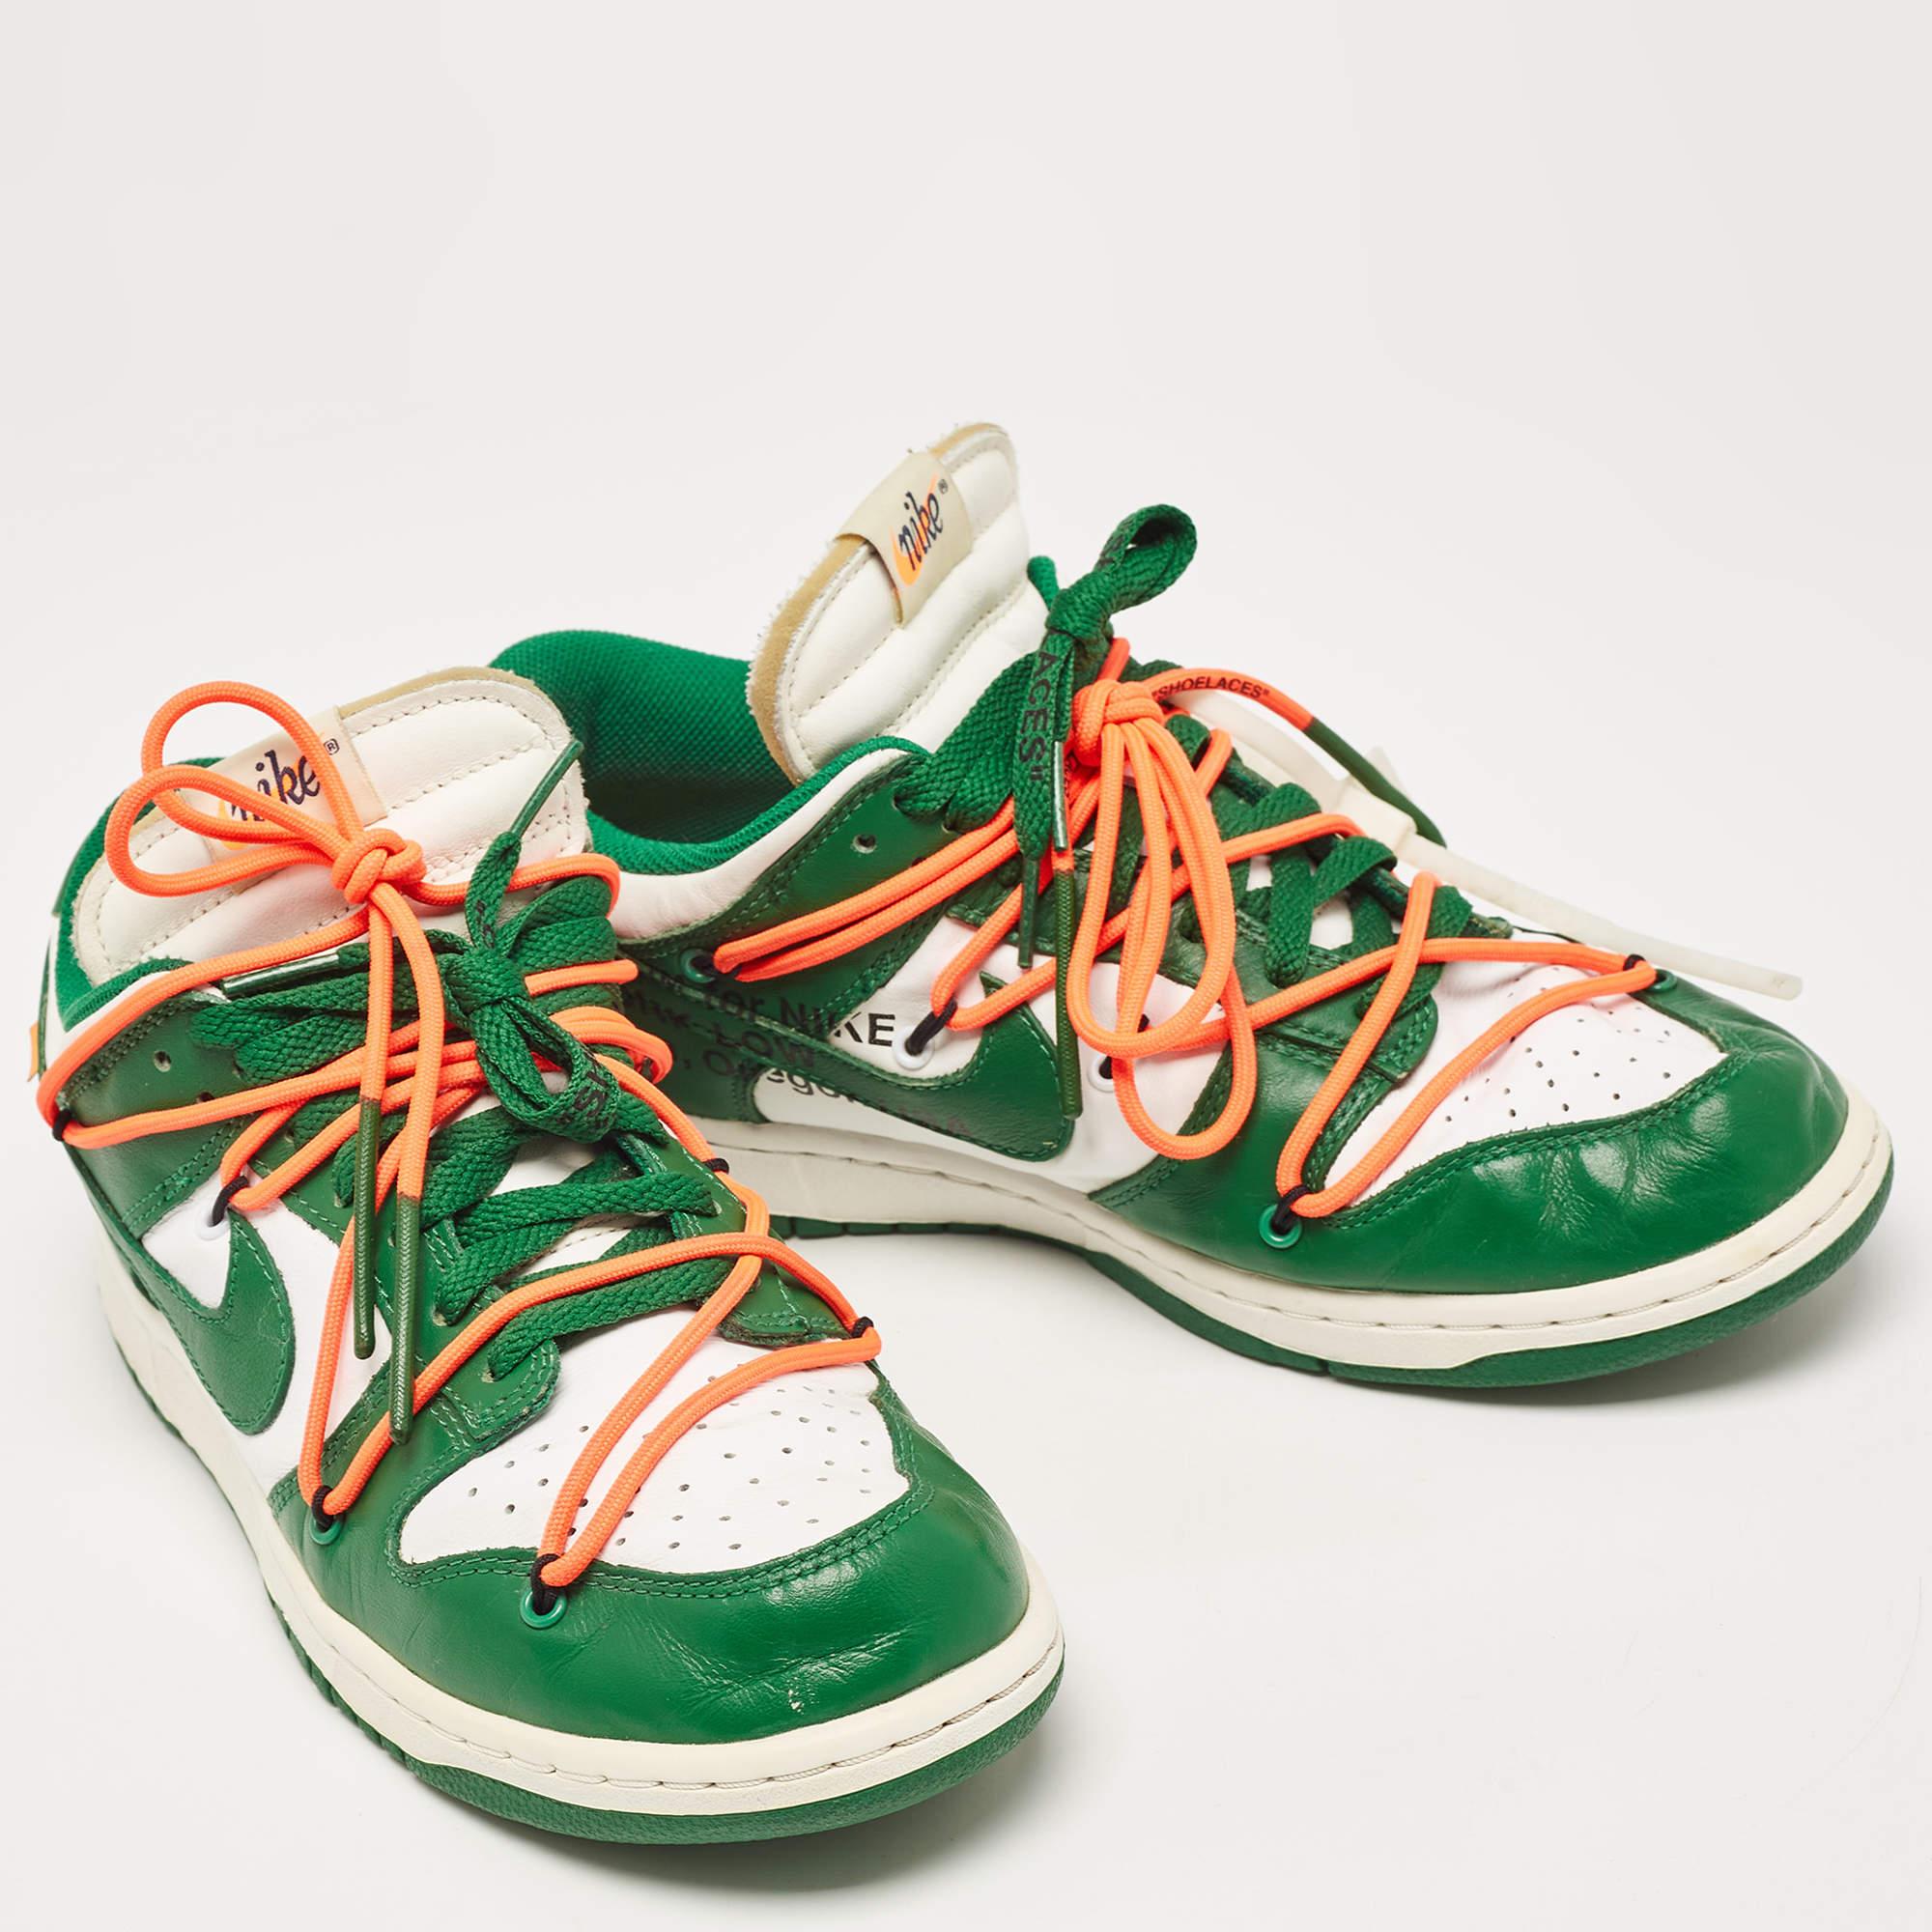 Off-White x Nike Green/White Leather Dunk Low Top Sneakers Size 42.5 1